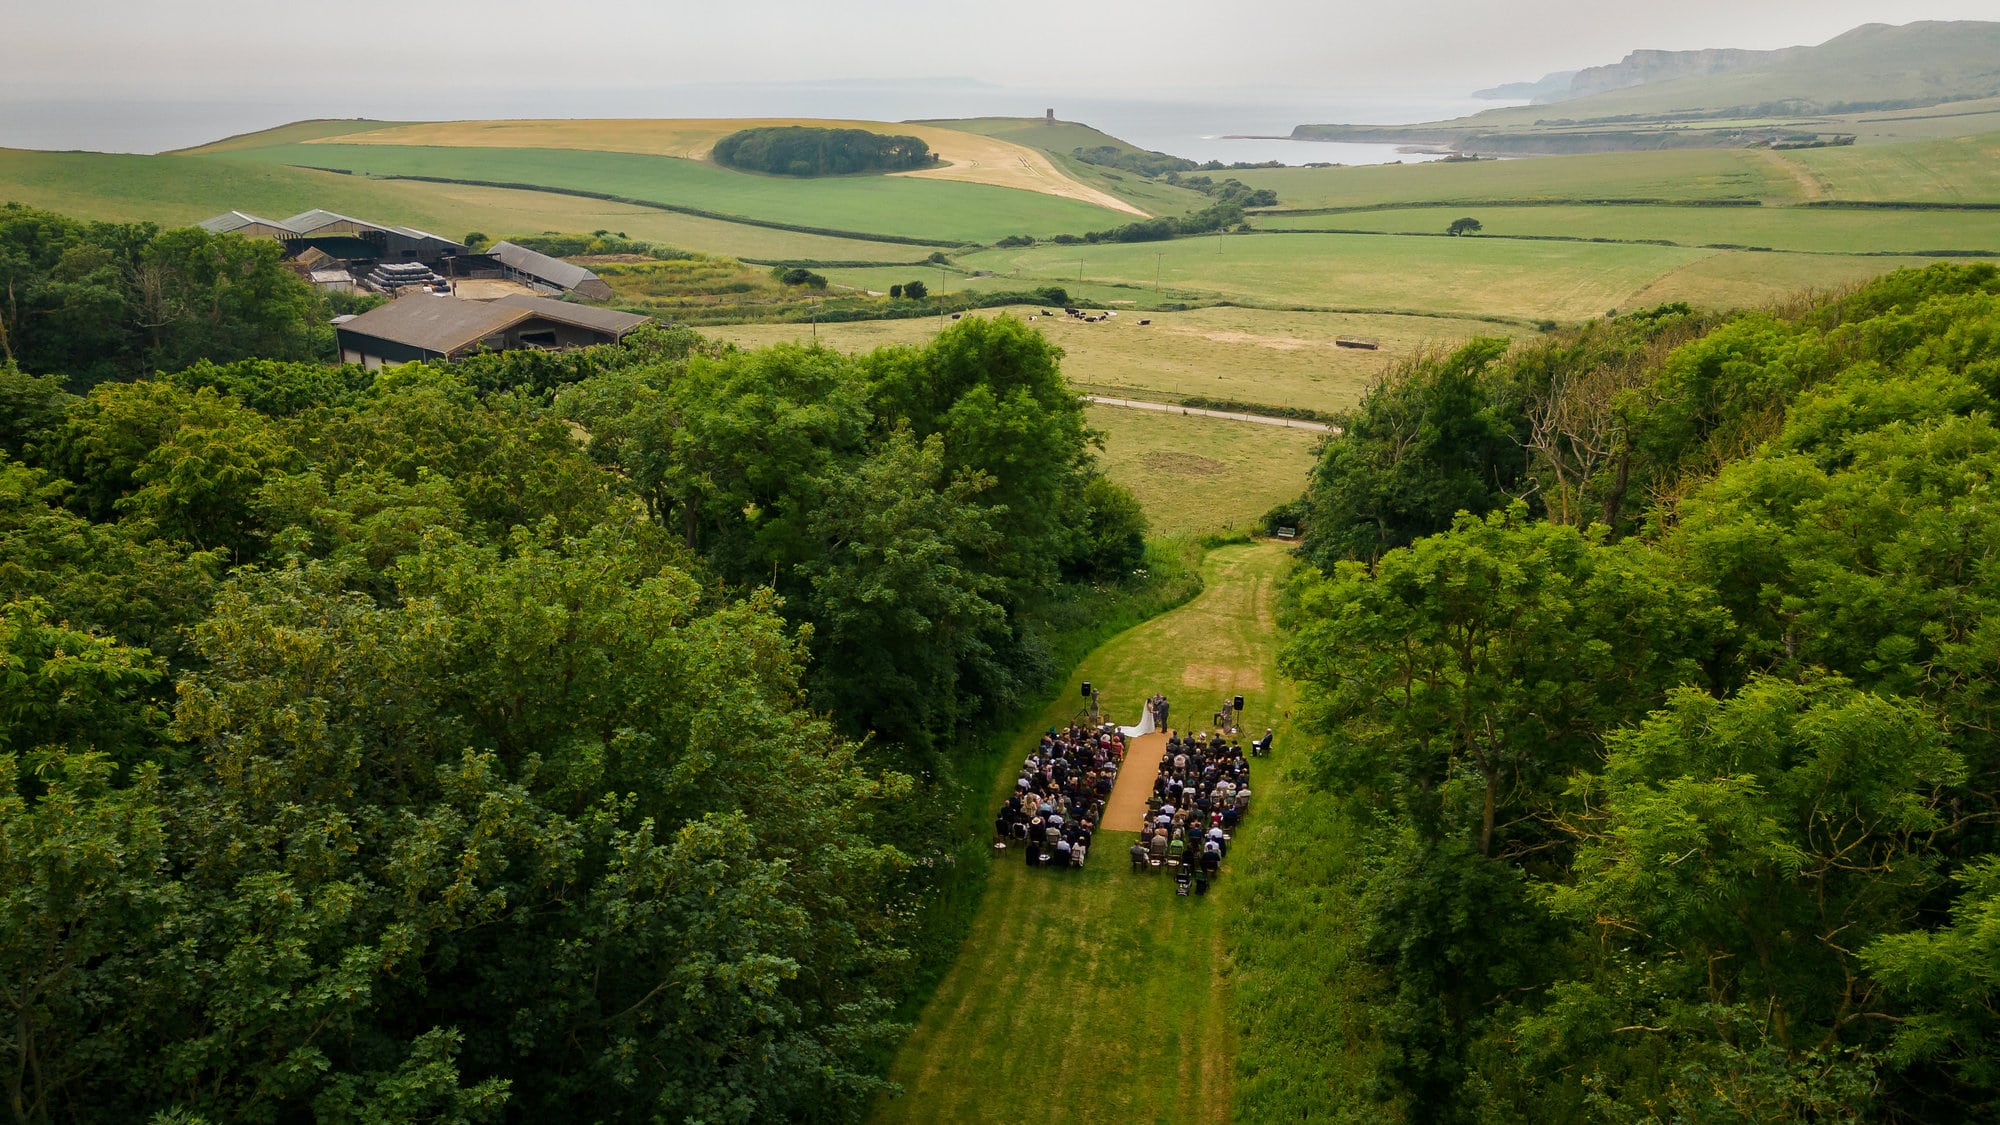 Smedmore House Wedding venue - Outdoor ceremony photographed from the air showing the Jurassic coastline